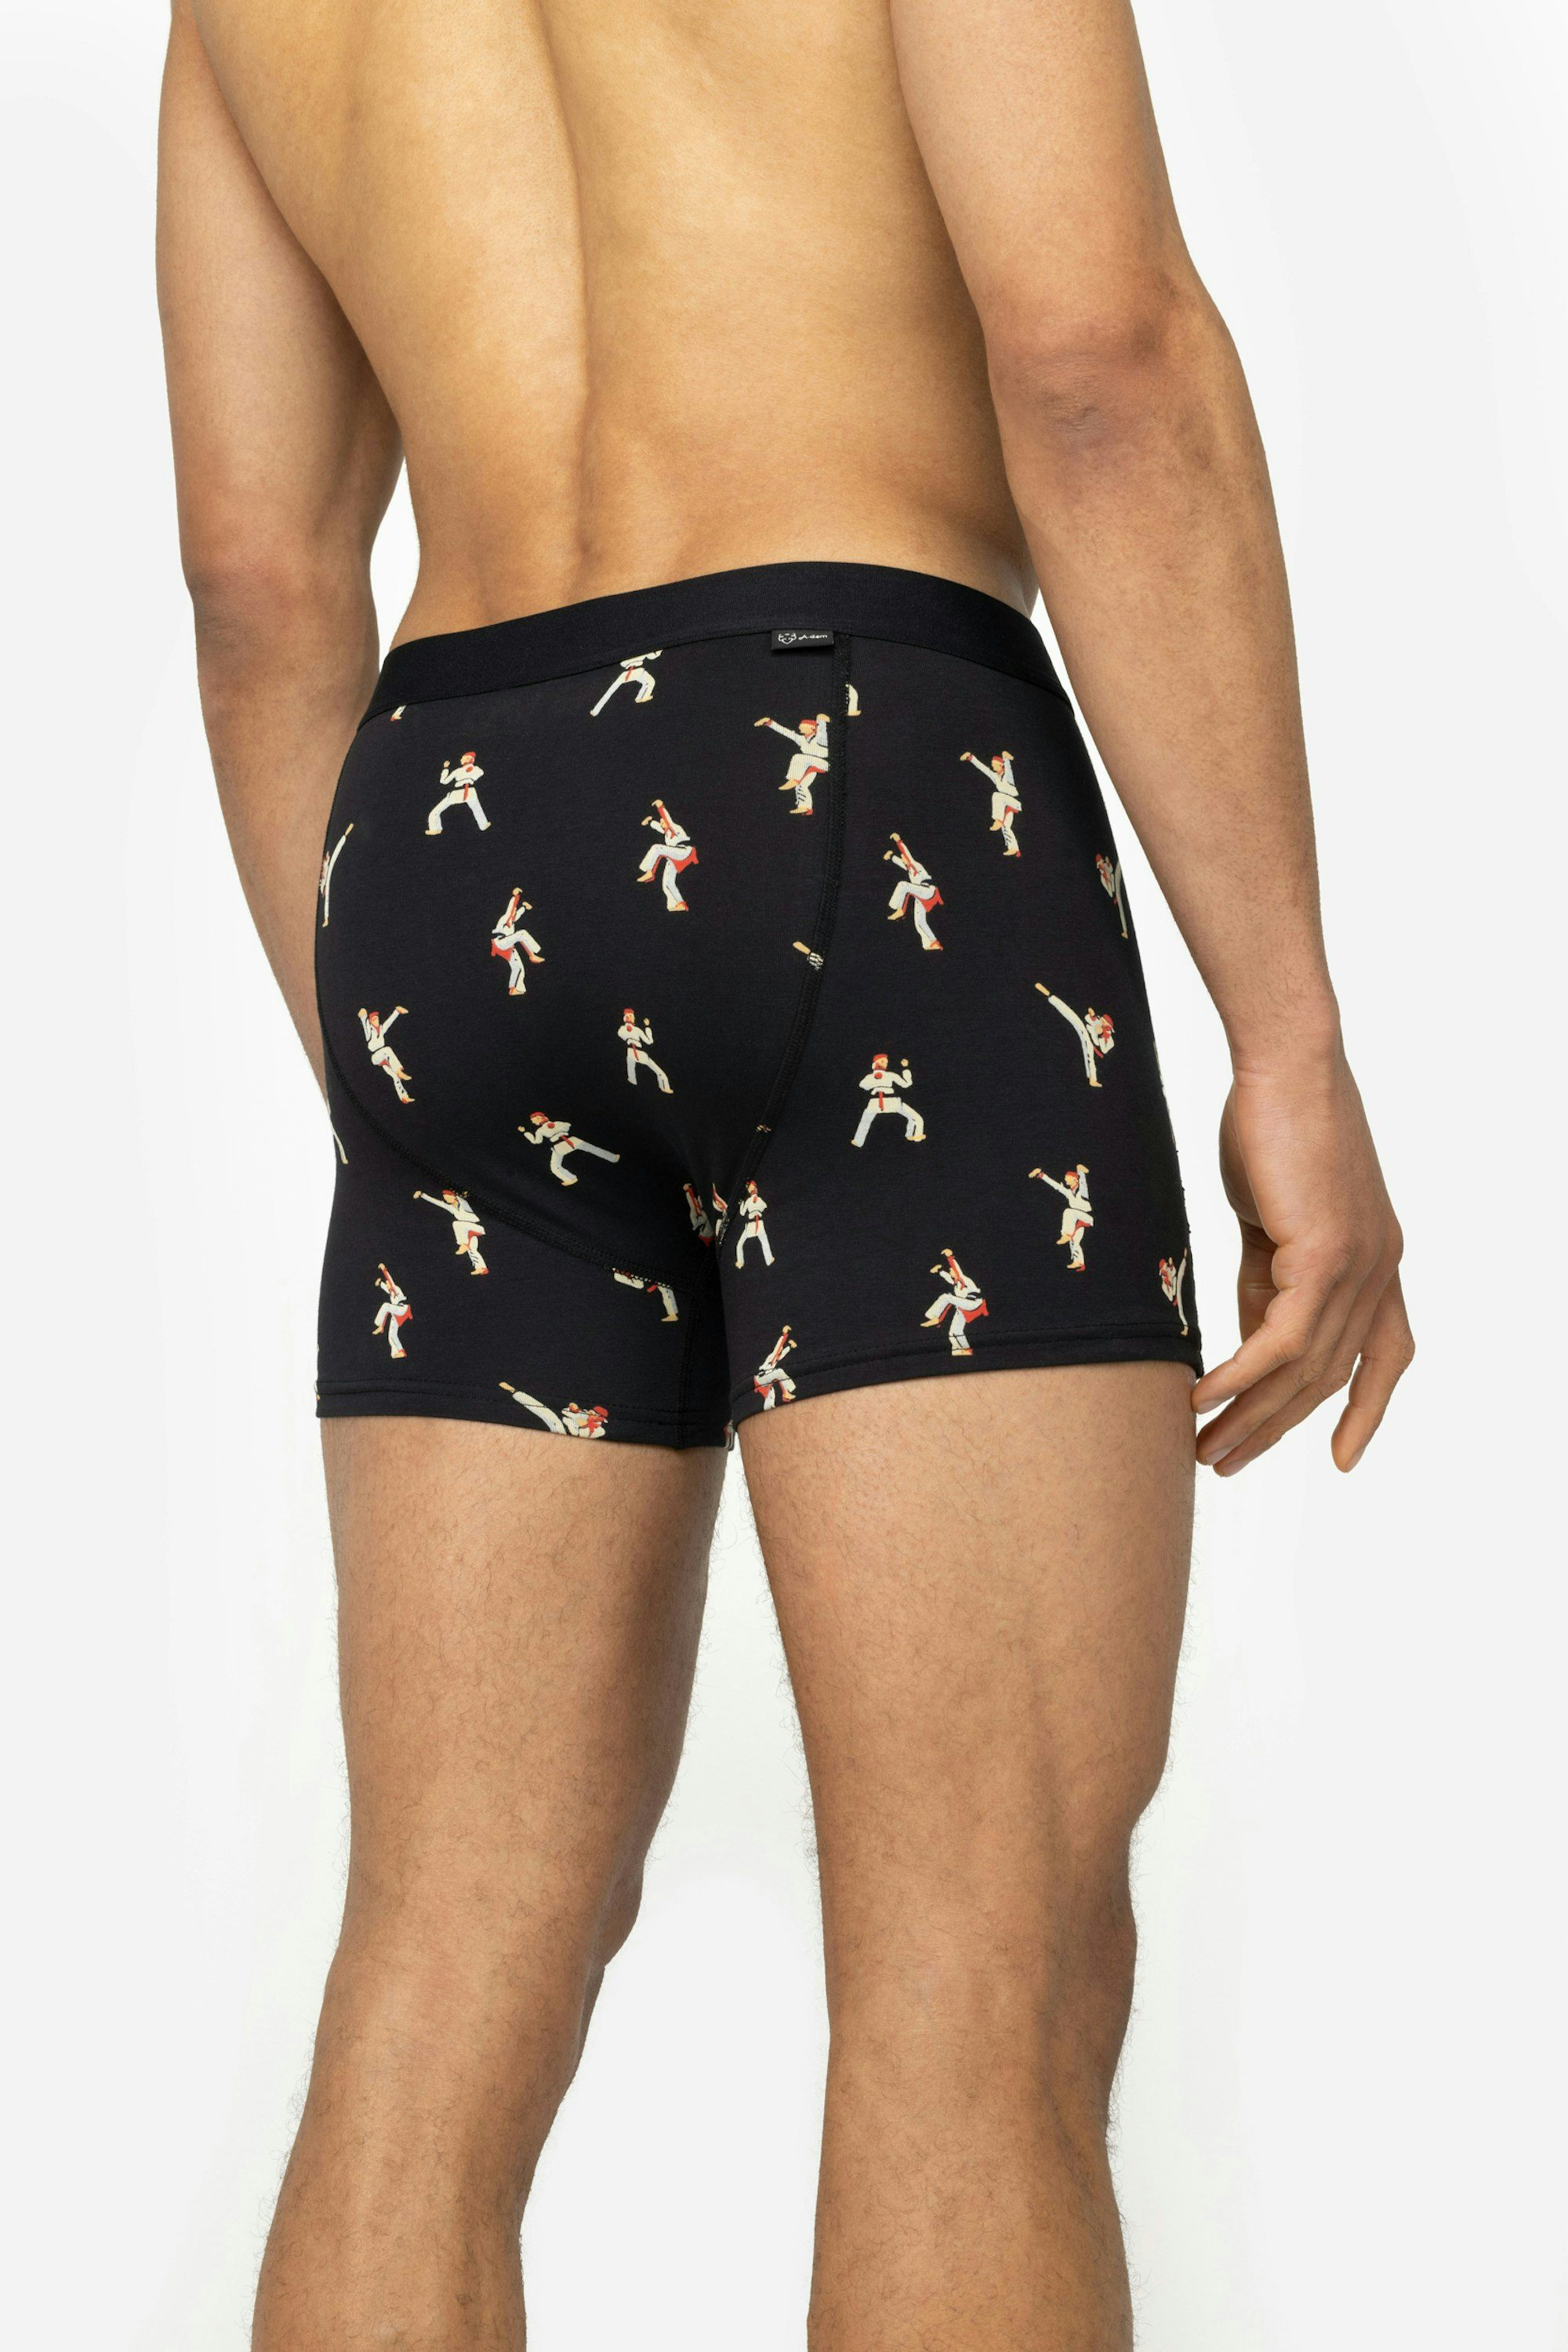 A-dam black boxer briefs with Karate print from GOTS organic cotton